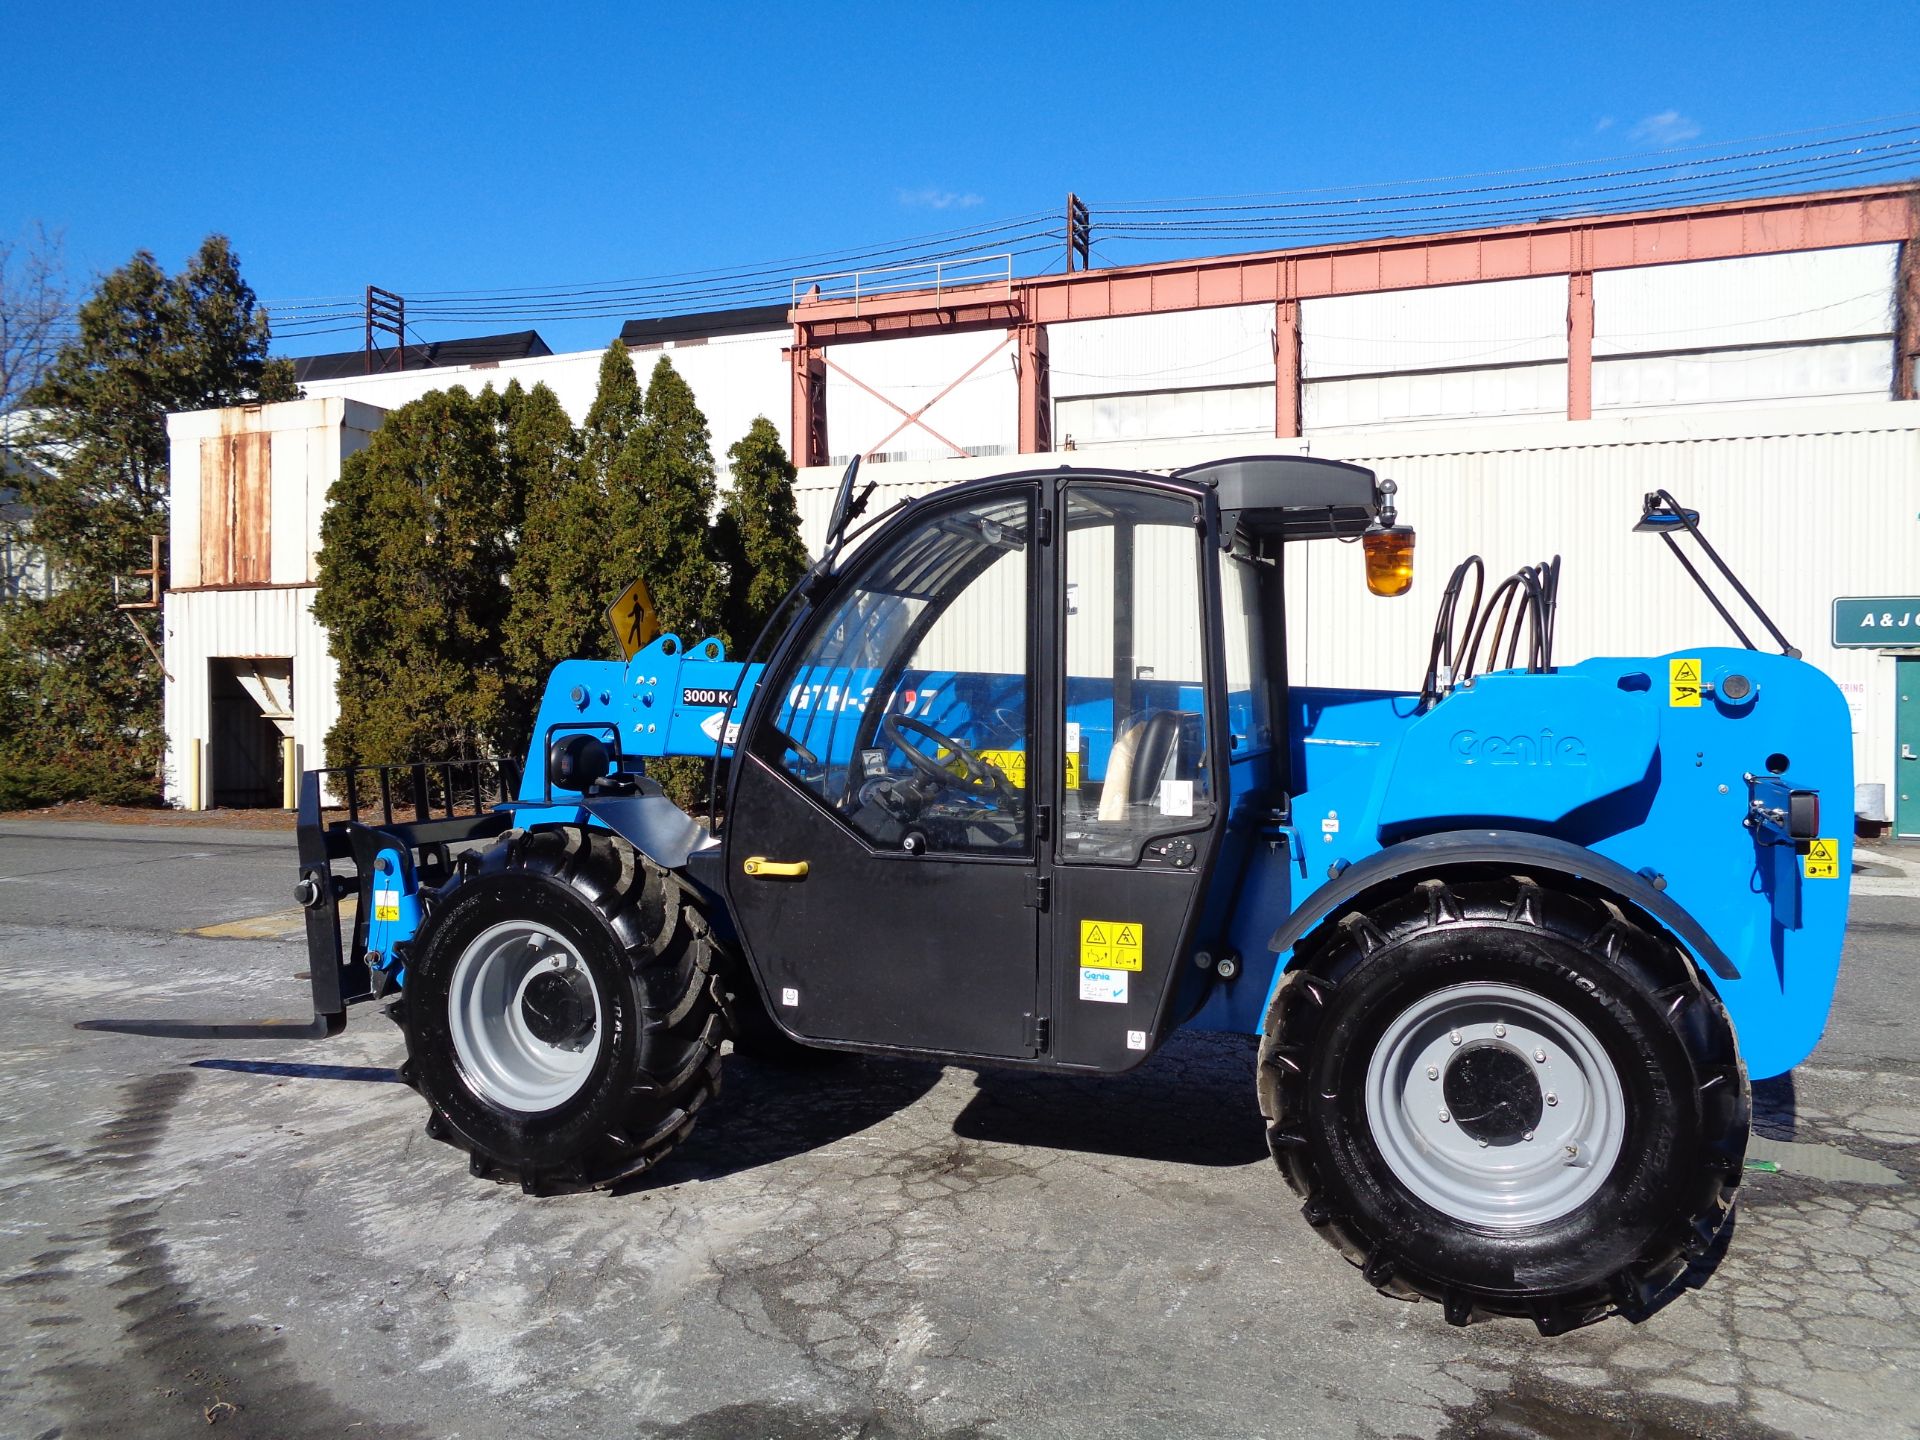 New Unused 2018 Genie GTH3007 Telescopic Forklift 6,600 lbs - Enclosed Cab - Image 18 of 23